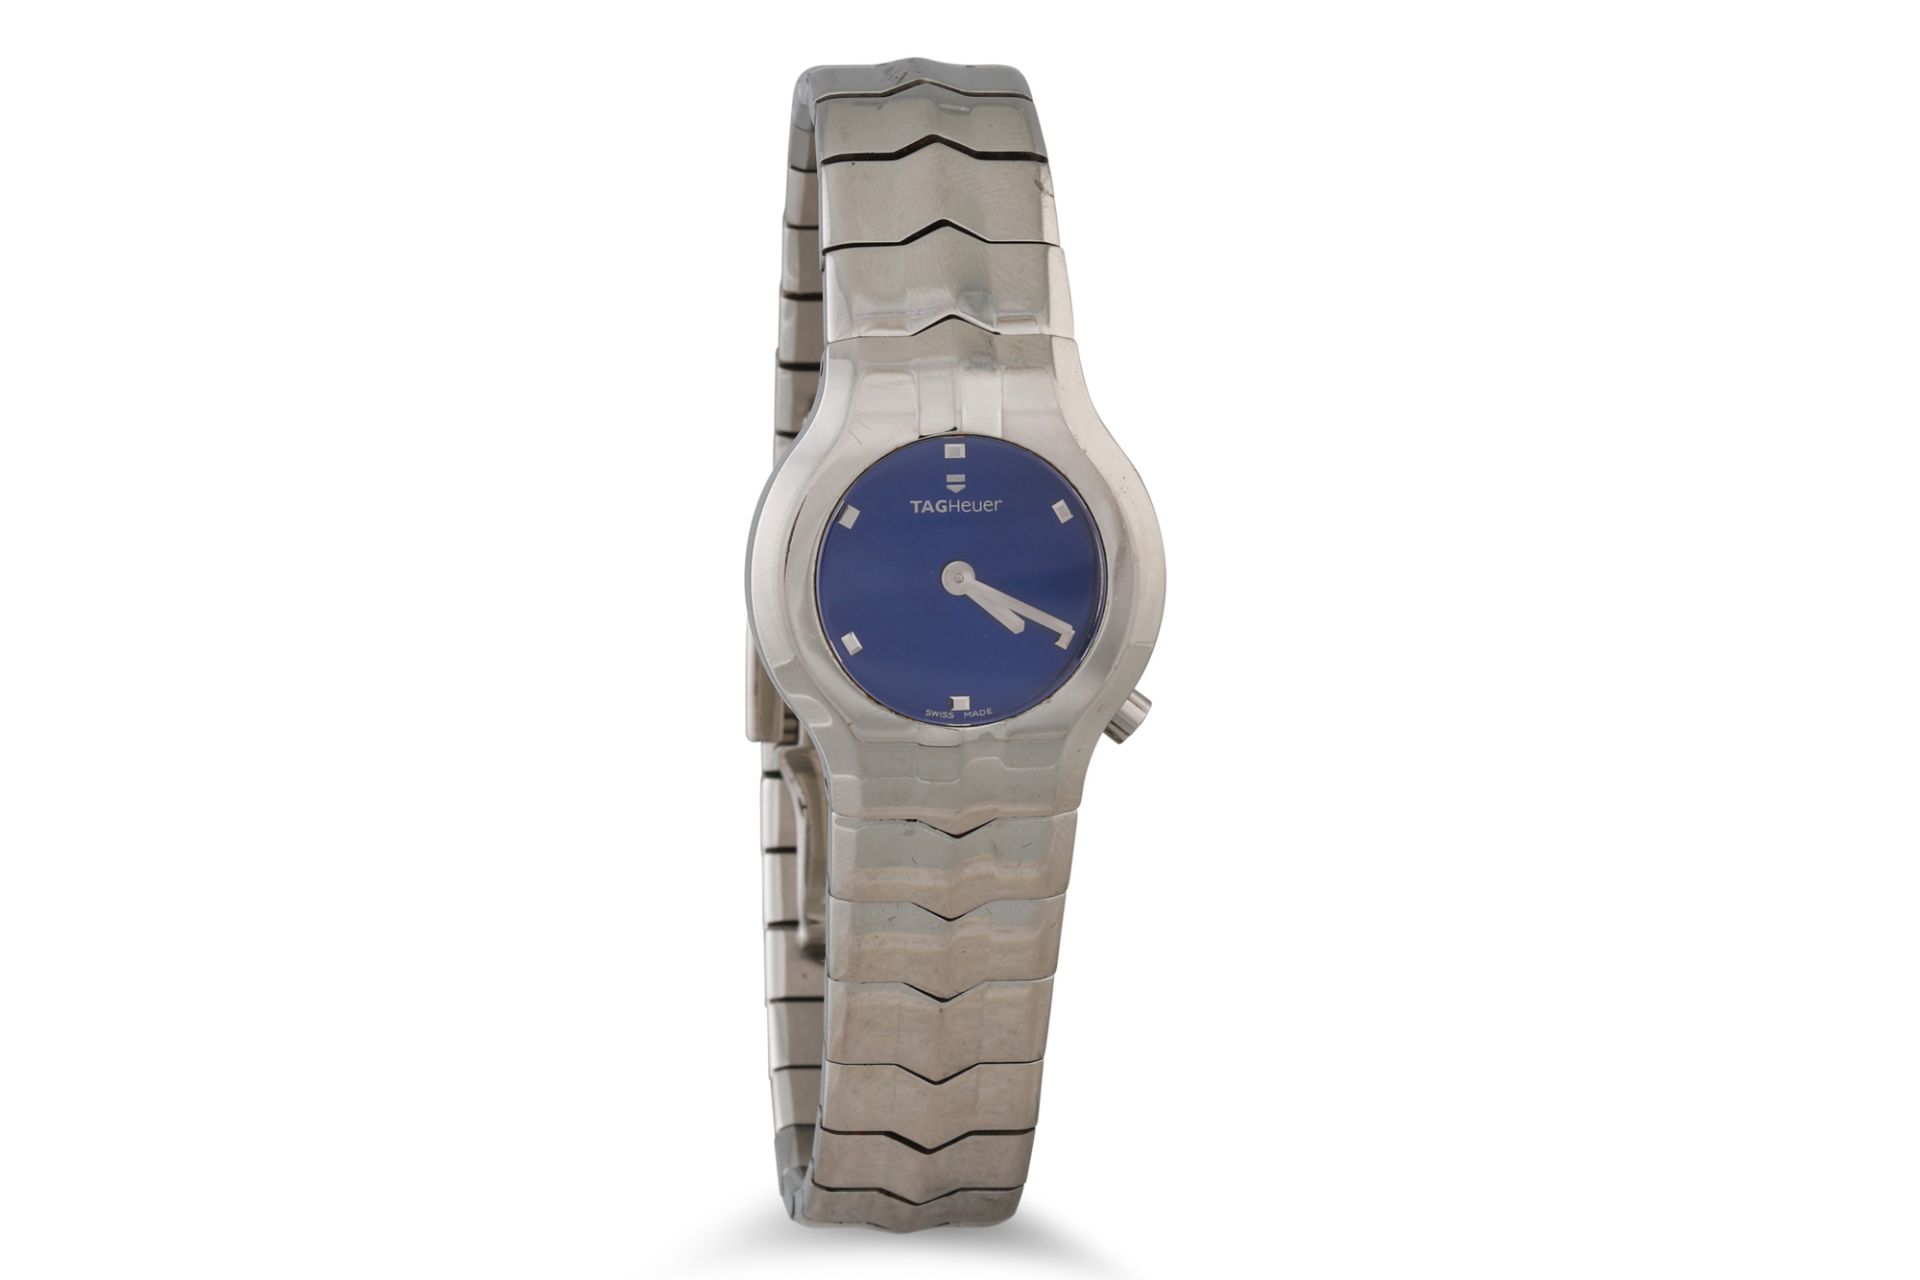 A LADY'S STAINLESS STEEL TAG HEUER WRISTWATCH, blue face, bracelet strap